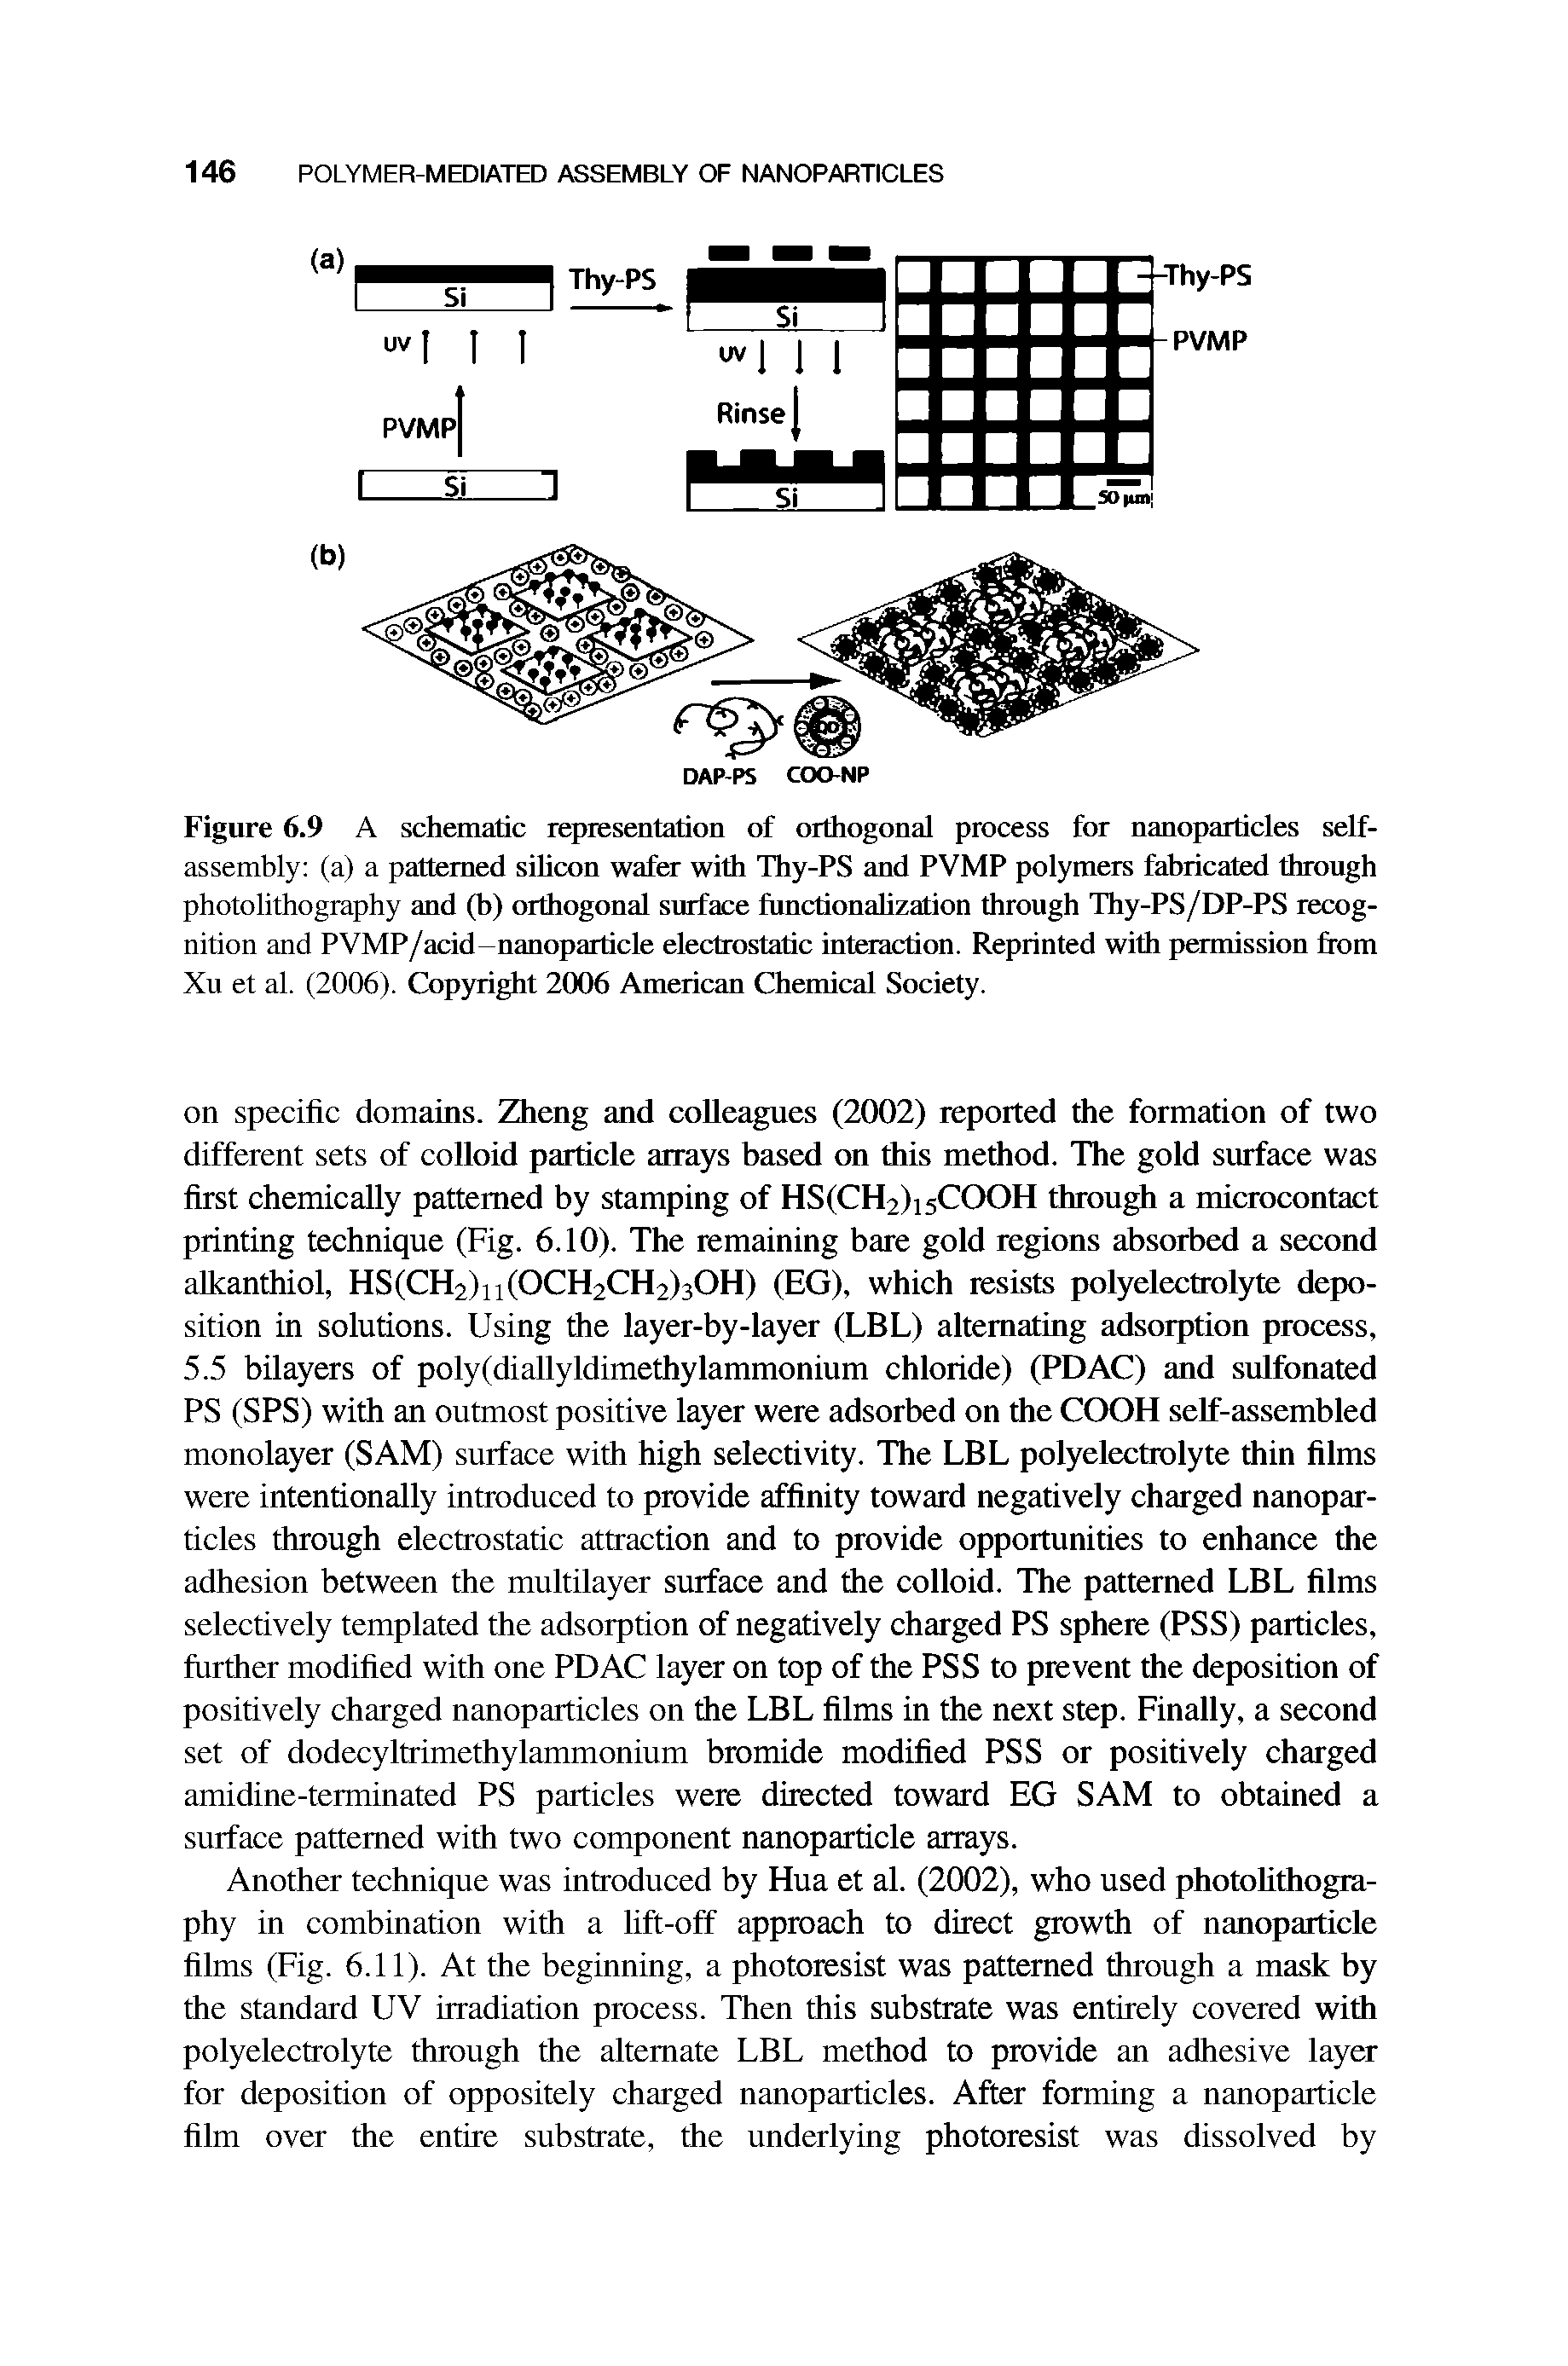 Figure 6.9 A schematic representation of orthogonal process for nanoparticles self-assembly (a) a patterned sihcon wafer with Thy-PS and PVMP polymers fabricated through photolithography and (b) orthogonal surface functionahzation through Thy-PS/DP-PS recognition and PVMP/acid-nanoparticle electrostatic interaction. Reprinted with permission from Xu et al. (2006). Copyright 2006 American Chemical Society.